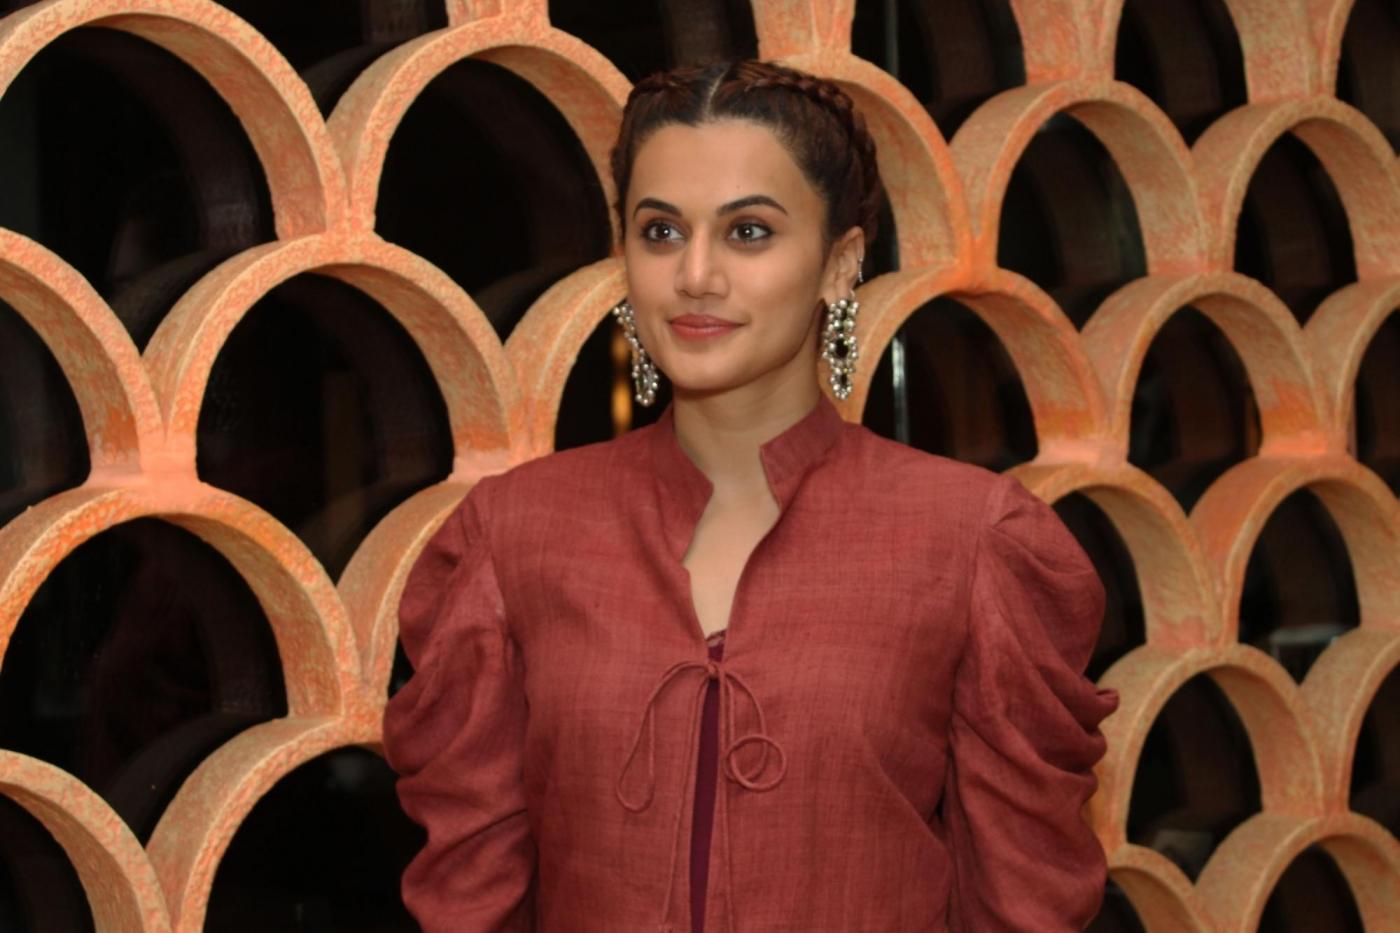 Greater Noida: Actress Taapsee Pannu at the promotion of her upcoming film "Manmarziyaan" in Greater Noida on Sept. 7, 2018. (Photo: Amlan Paliwal/IANS) by .